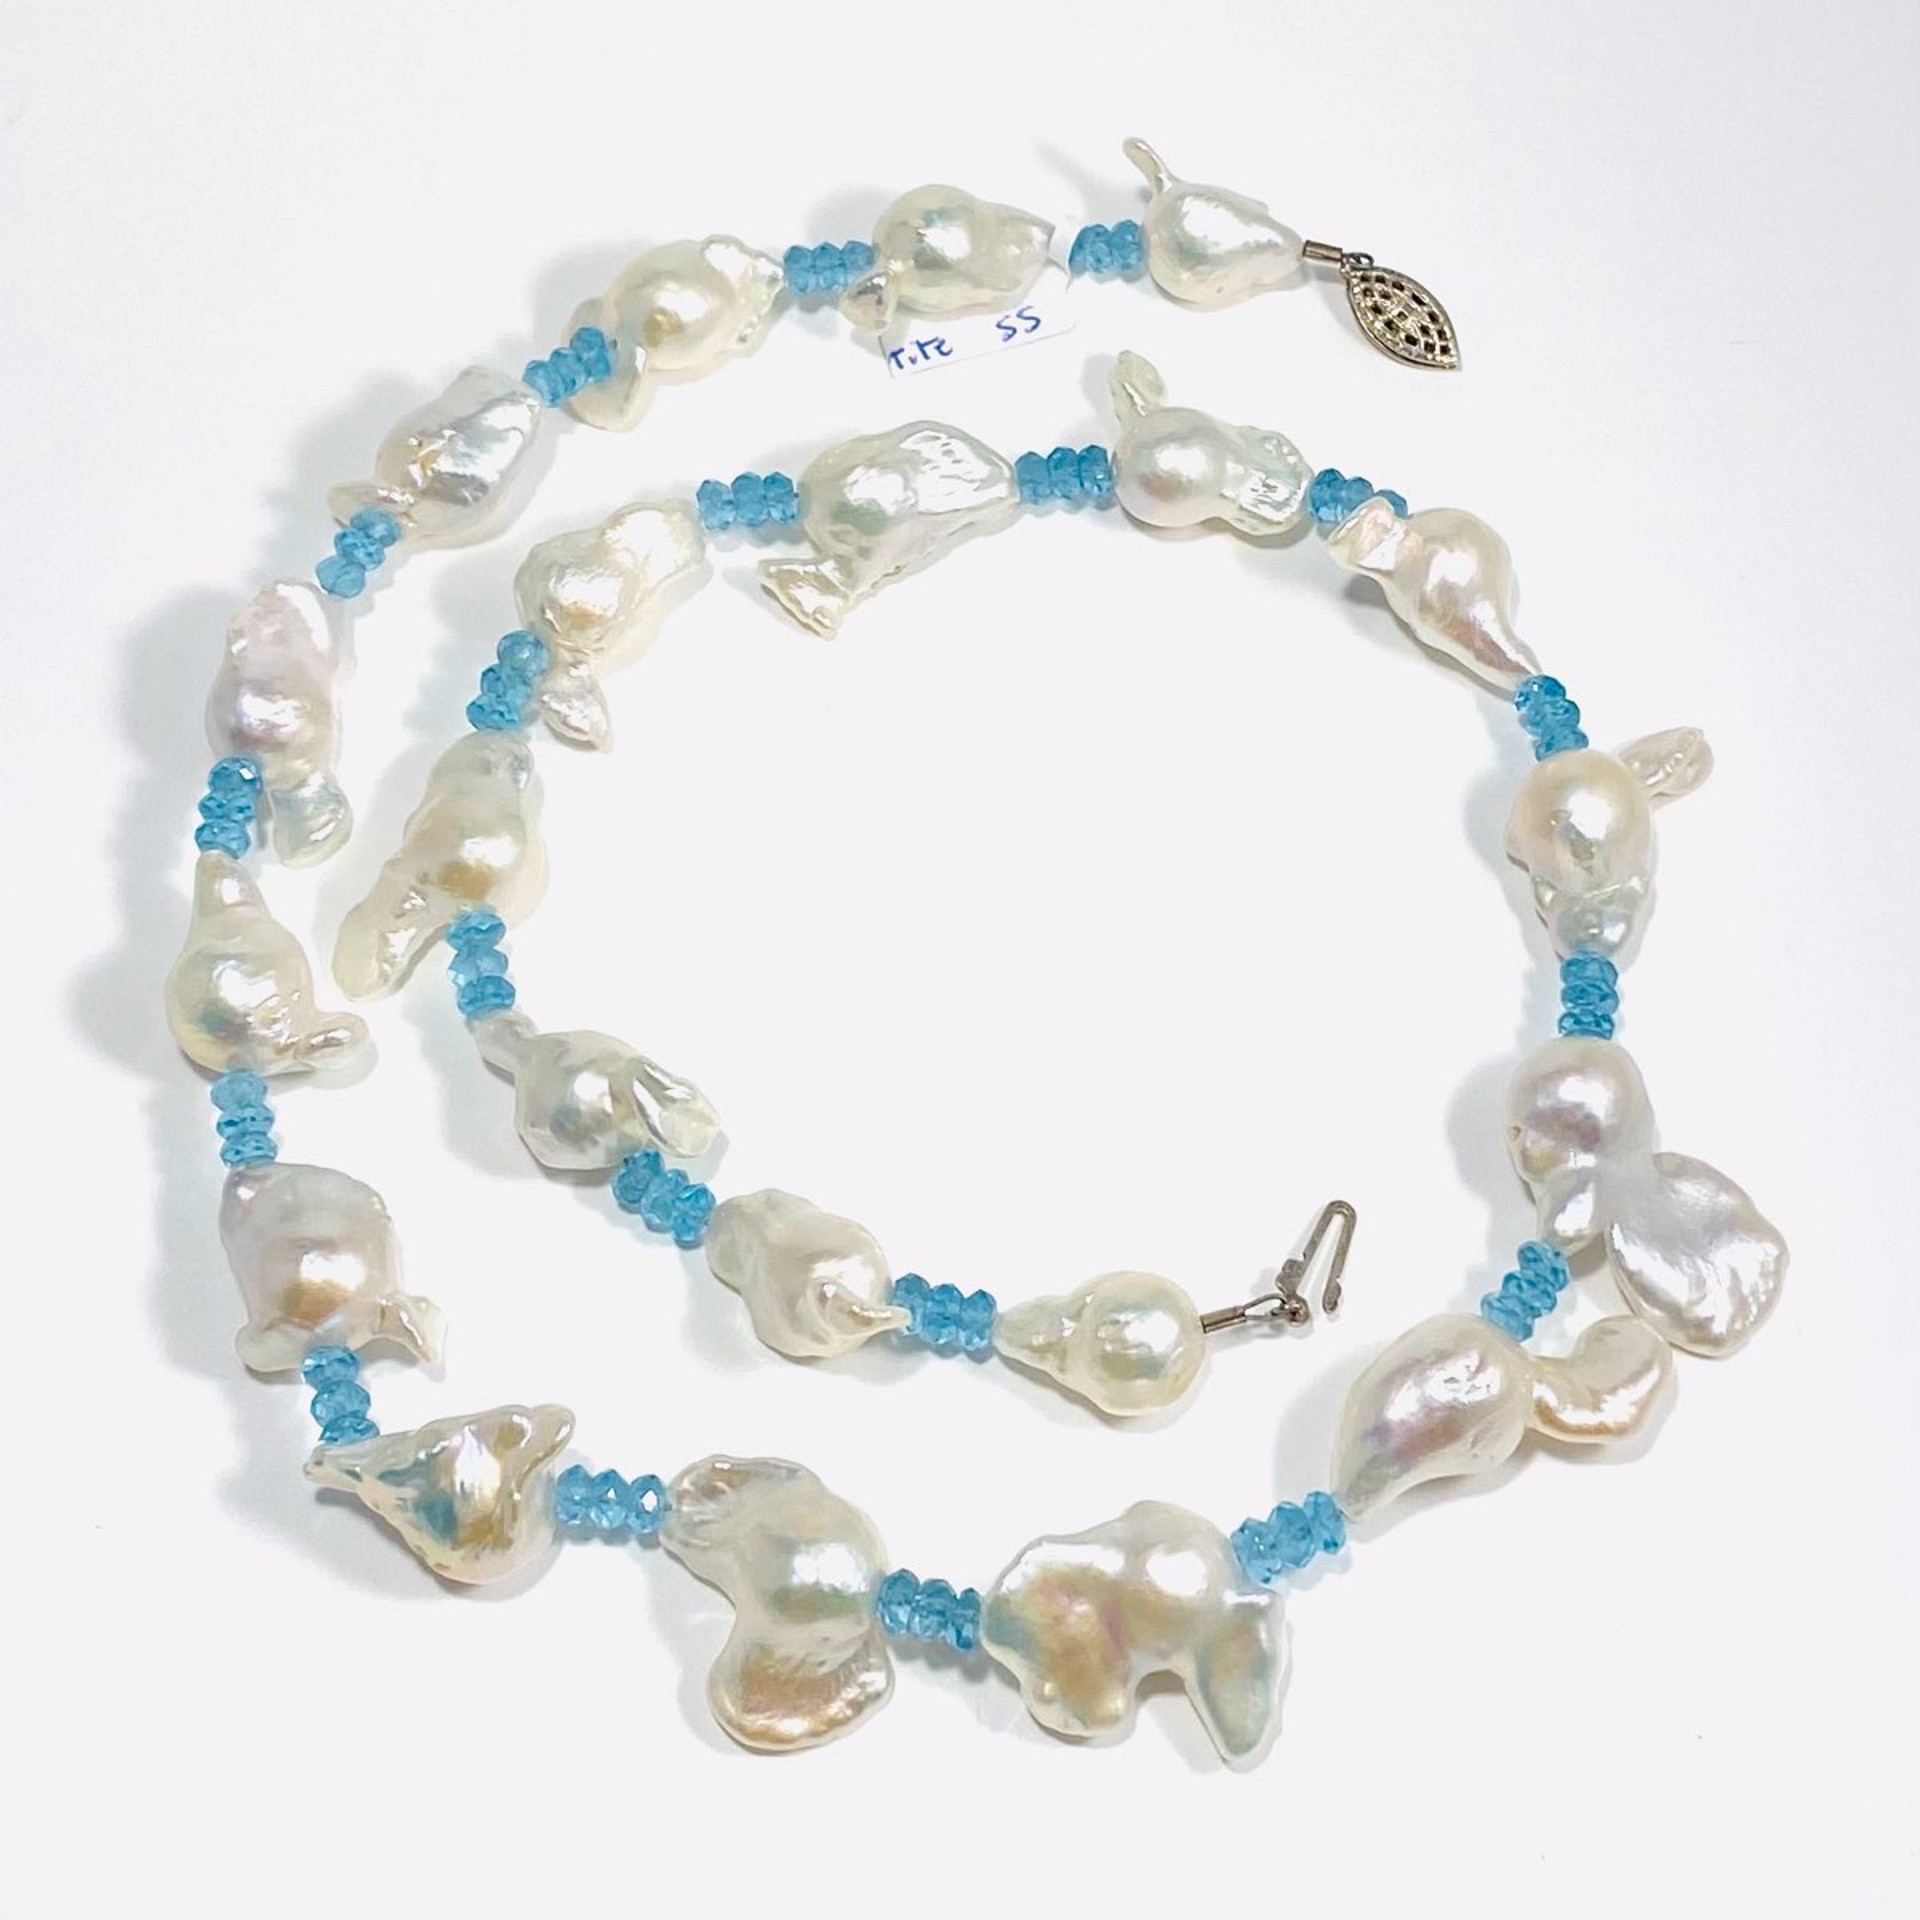 NT20-21 Baroque Pearl, Faceted Apatite Necklace by Nance Trueworthy